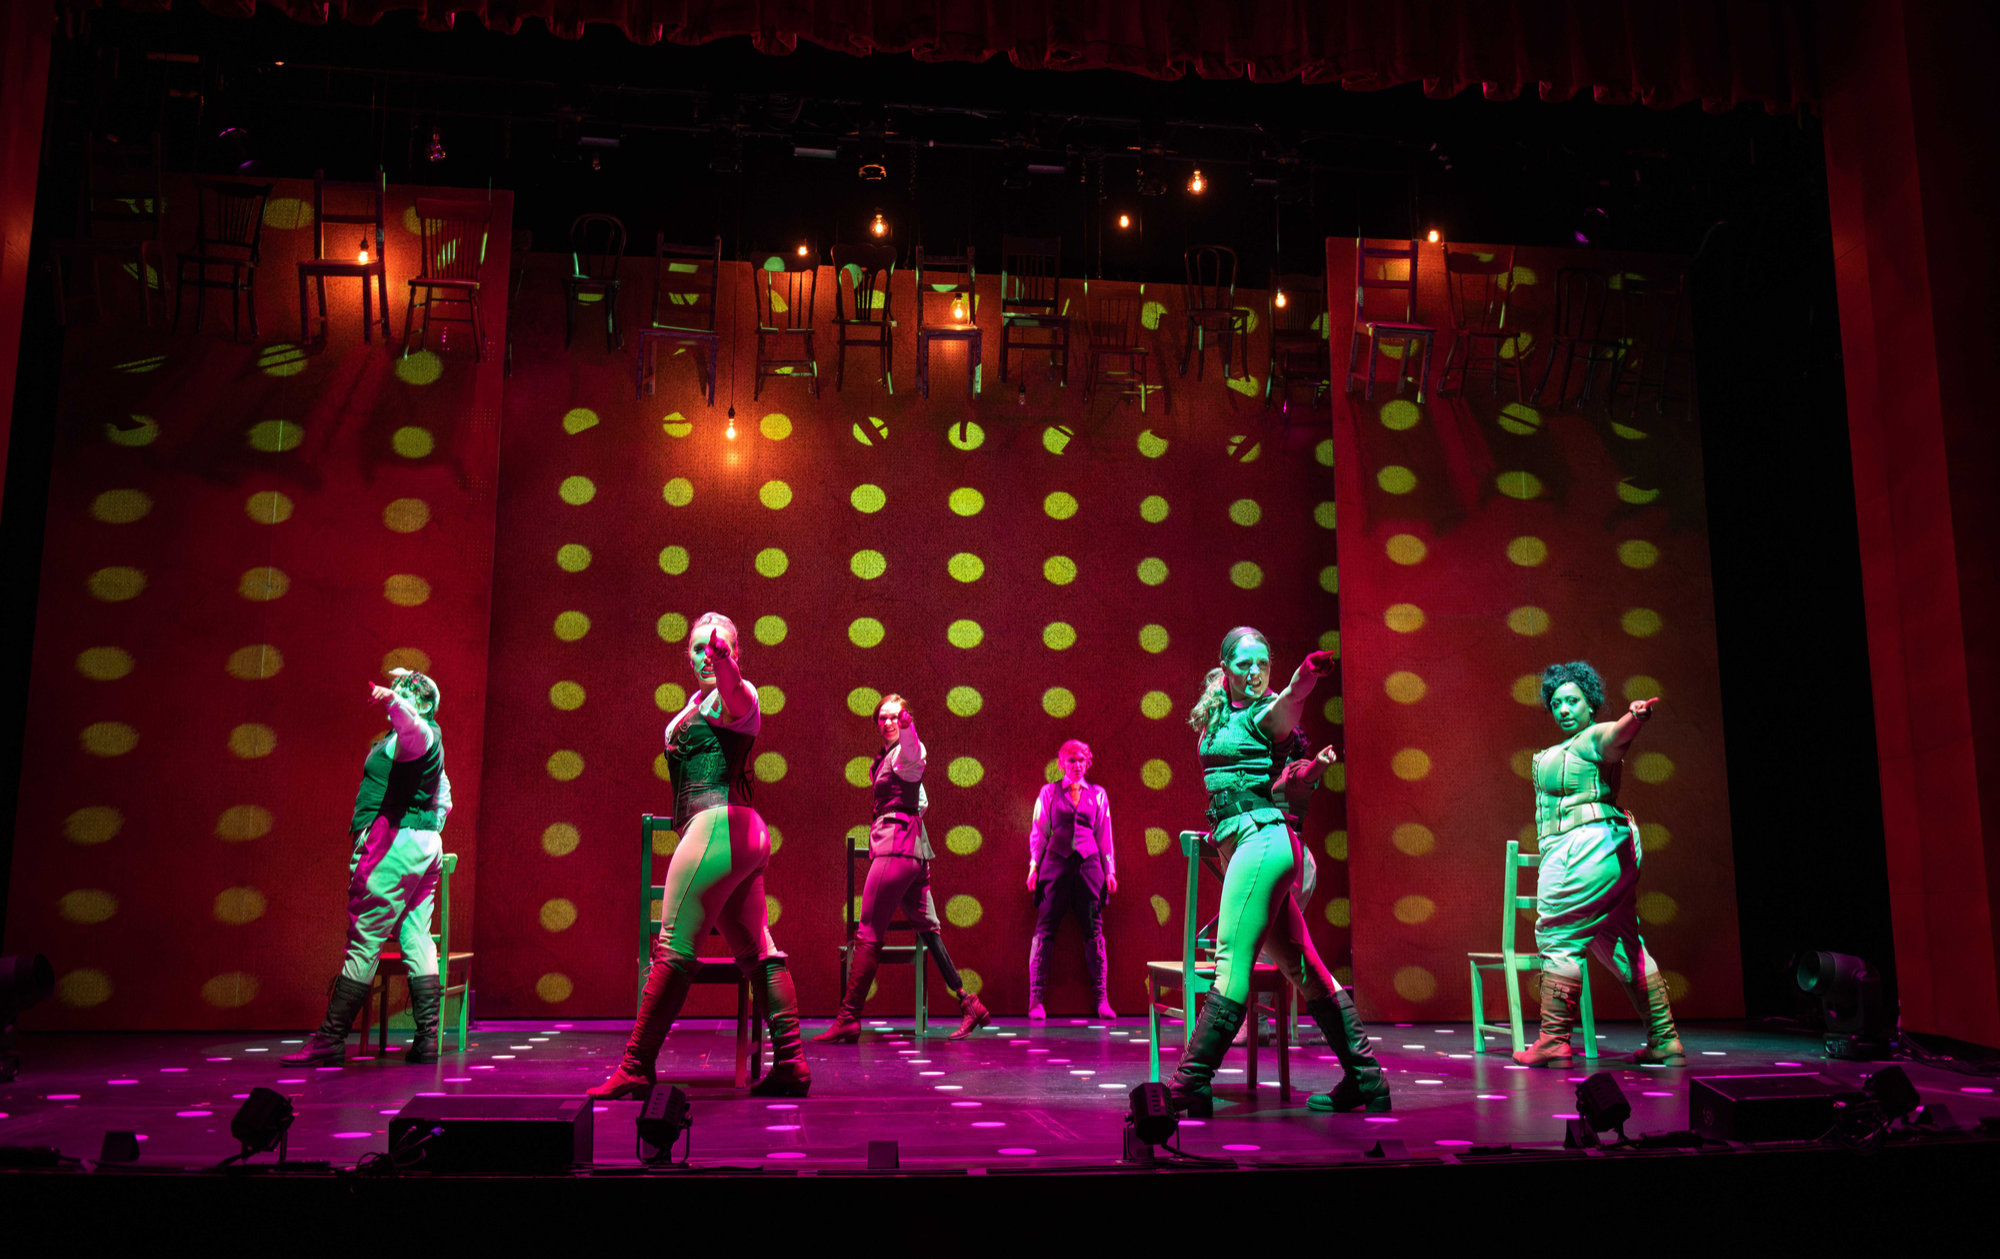 Seven women stand on stage, under moody but vibrant lights. Six stand by chairs, pointing towards the audience, while the seventh stands at the back of the stage.